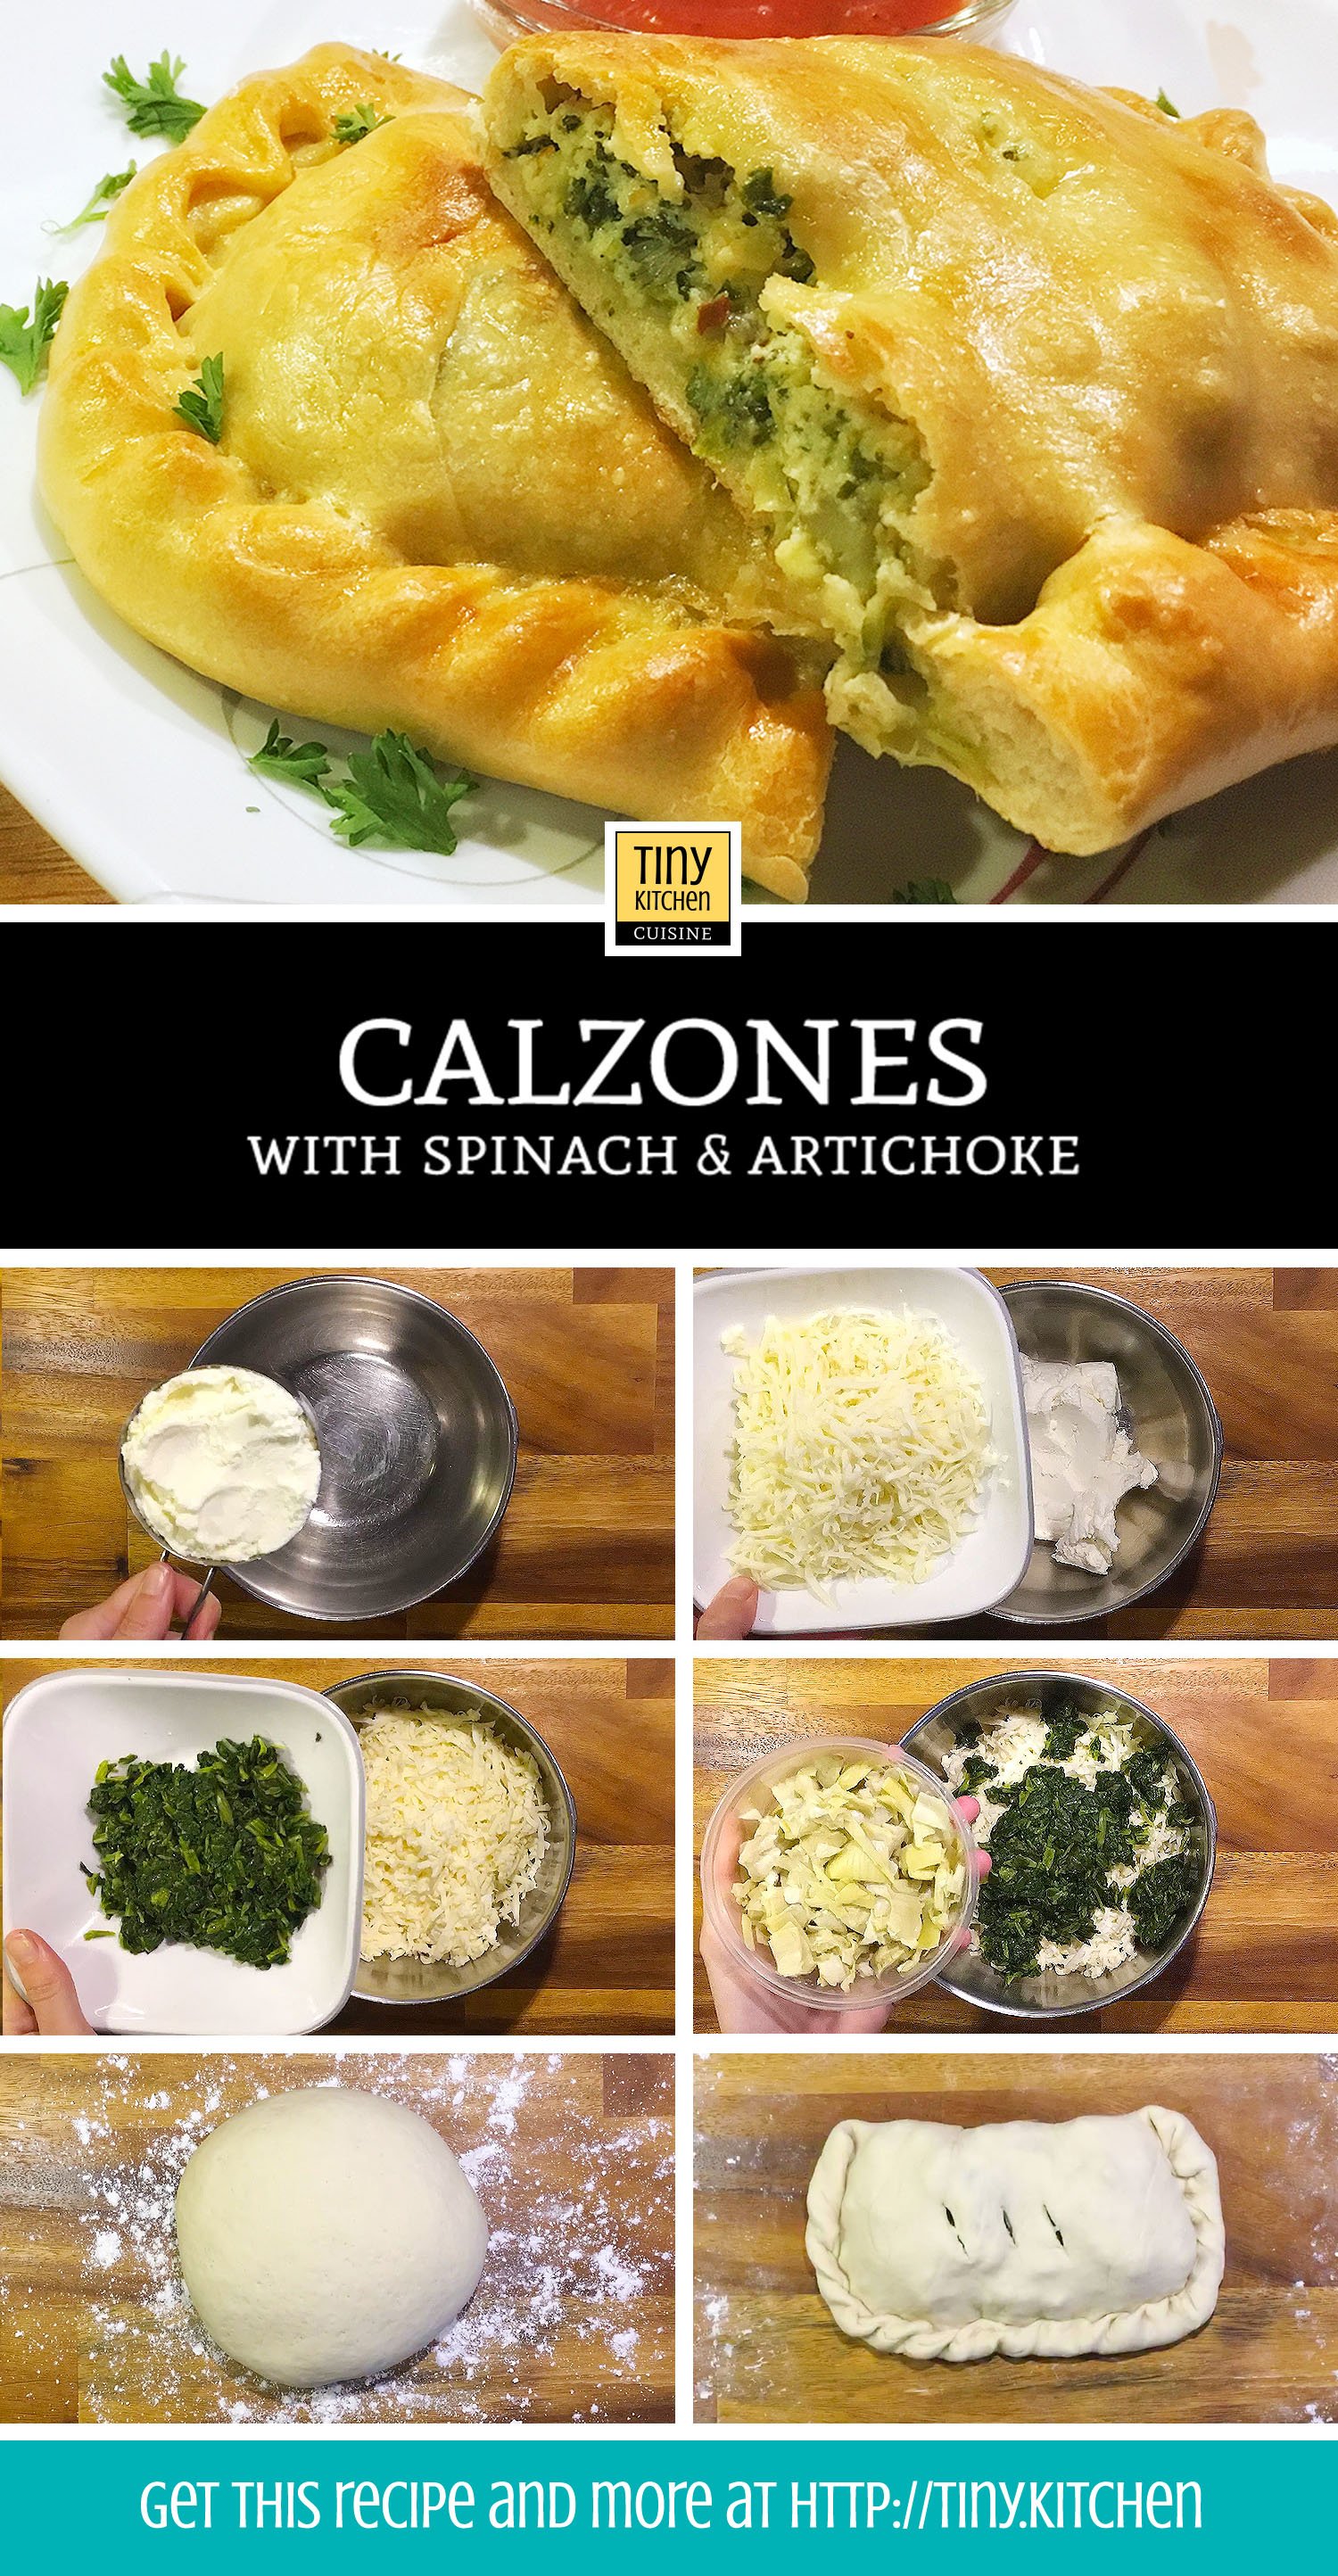 Cooking this Spinach Artichoke Calzone recipe from scratch in a tiny kitchen can be a labor of love but knowing how to make calzones is definitely worth it! | Tiny Kitchen Cuisine | http://tiny.kitchen